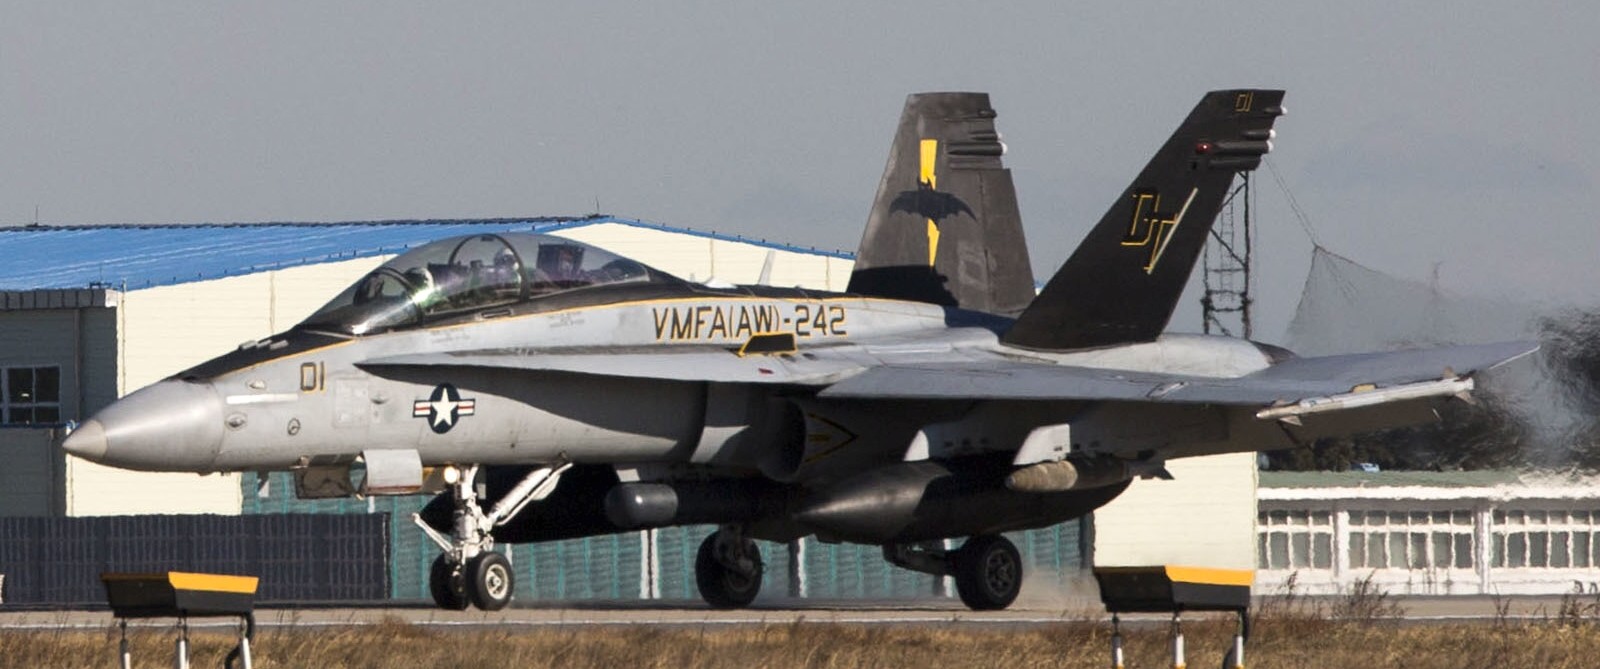 vmfa(aw)-242 bats marine all-weather fighter attack squadron usmc f/a-18d hornet 83 pohang air base korea